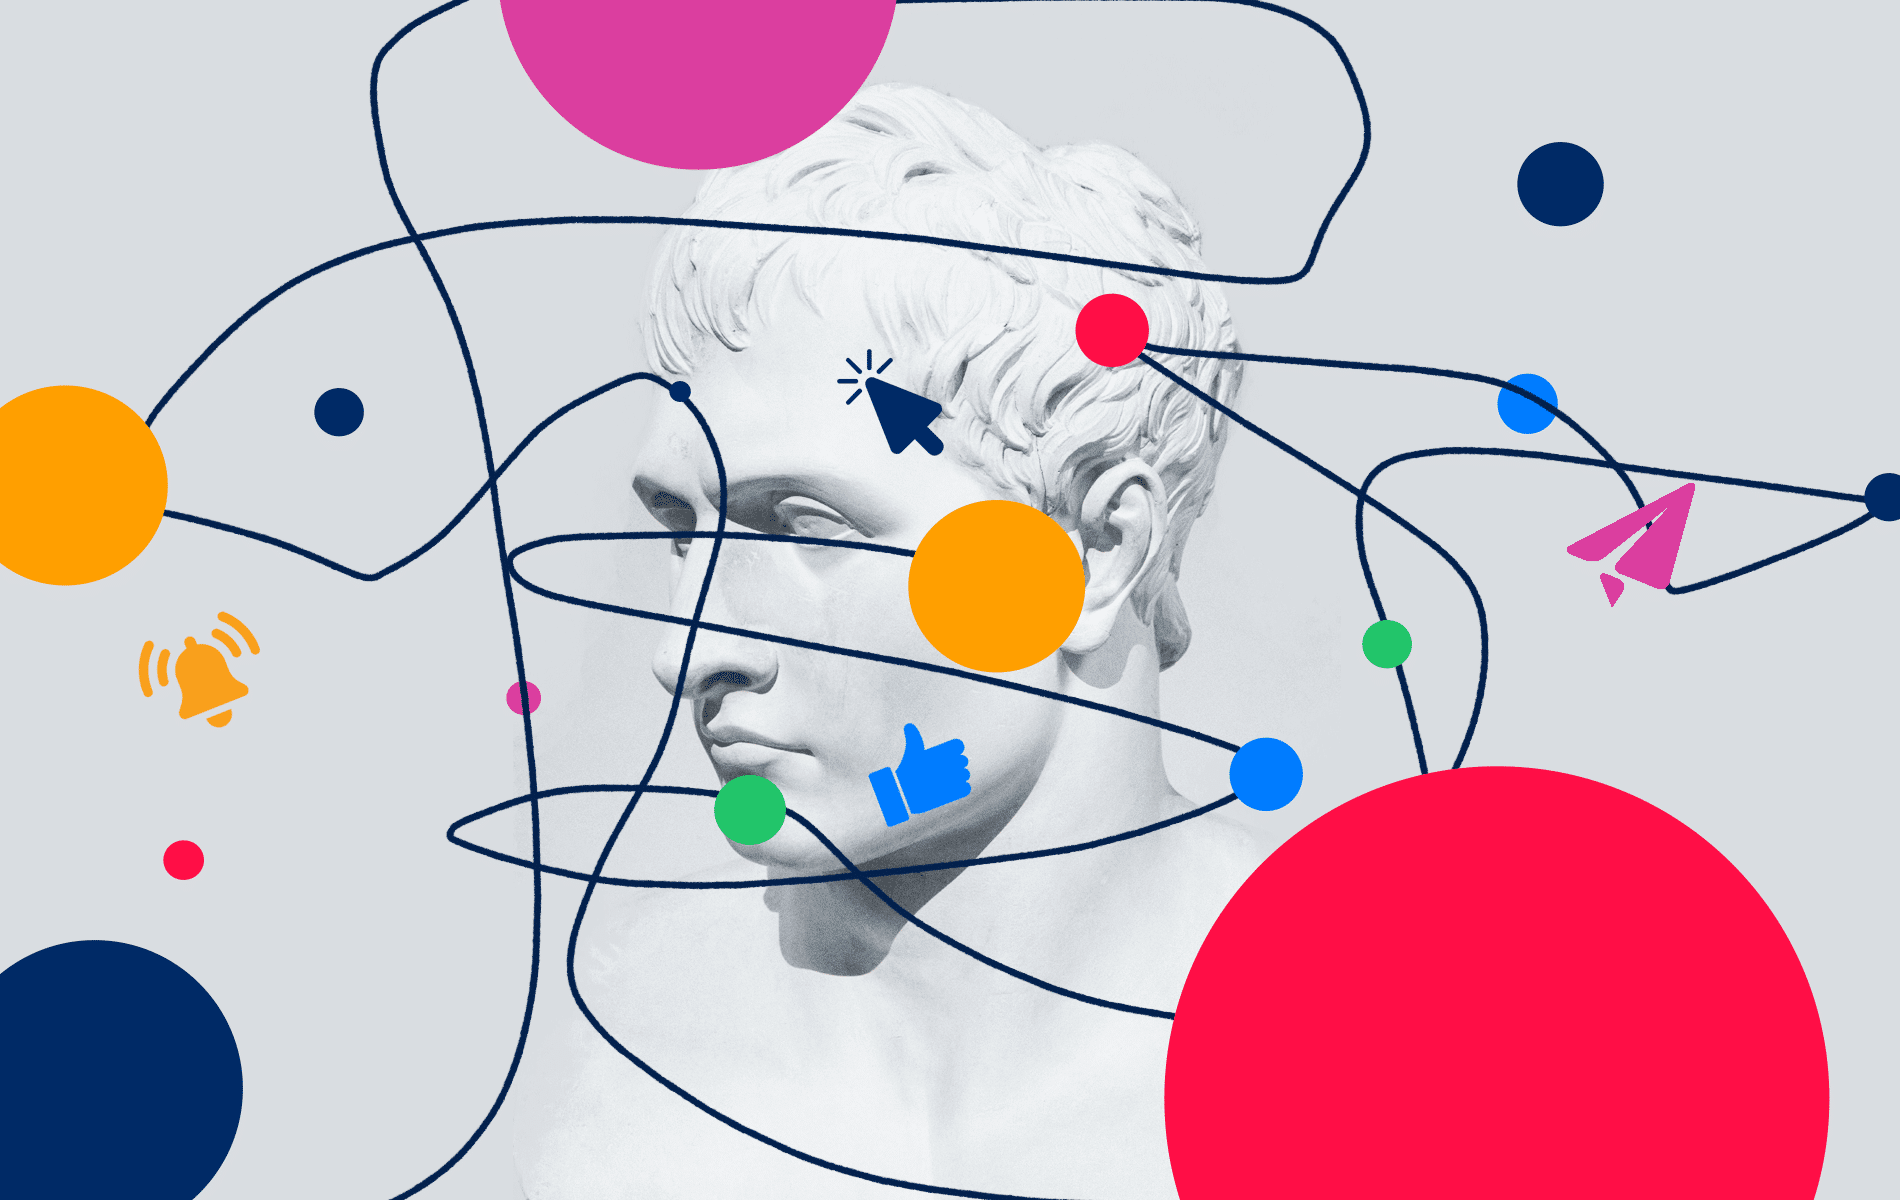 Abstract image of shapes and icons floating around a head depicting fractured attention